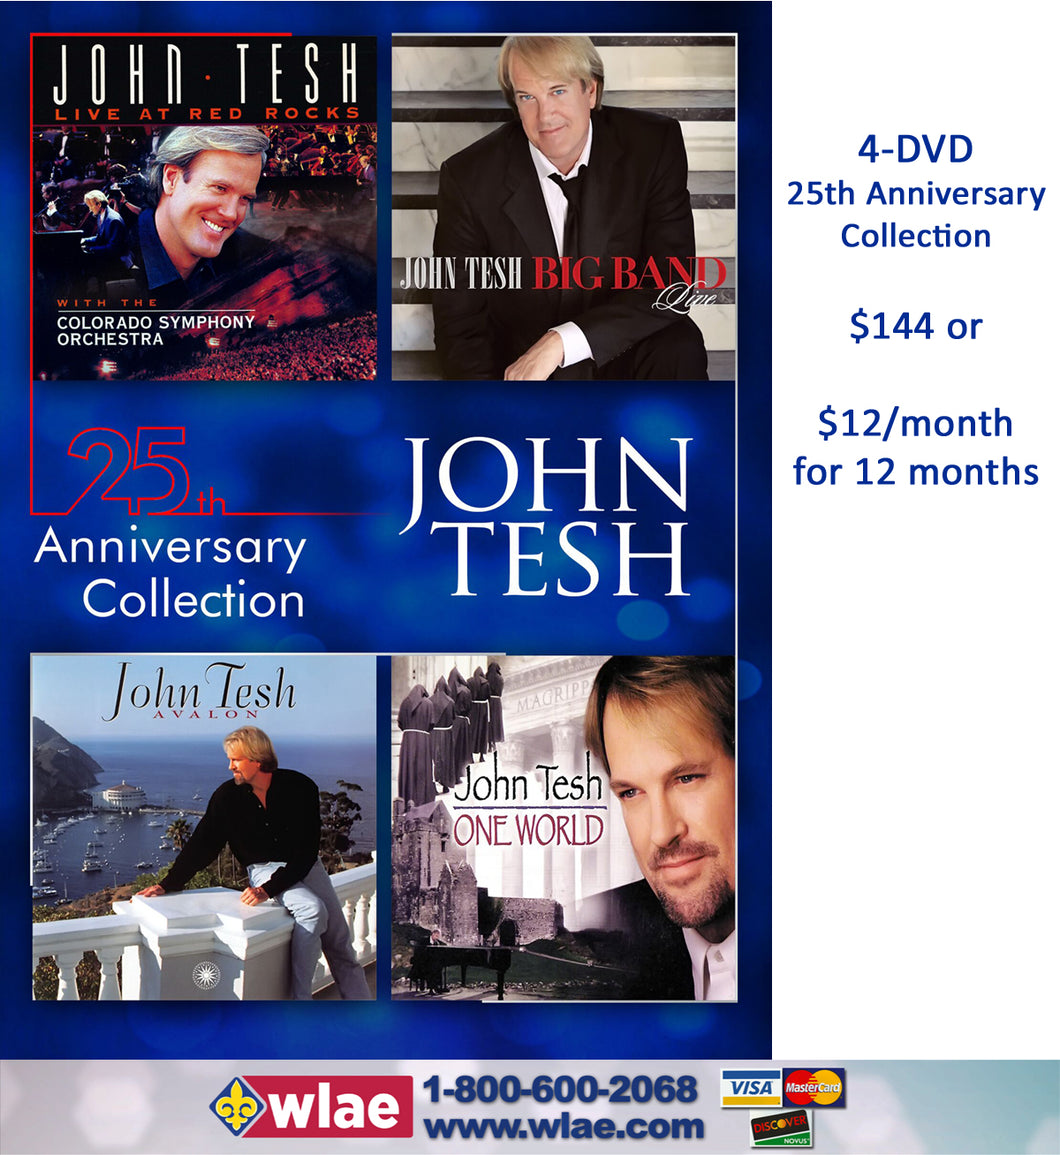 John Tesh: Songs and Stories from the Grand Piano 2 - 4-DVD 25th Anniversary Collection